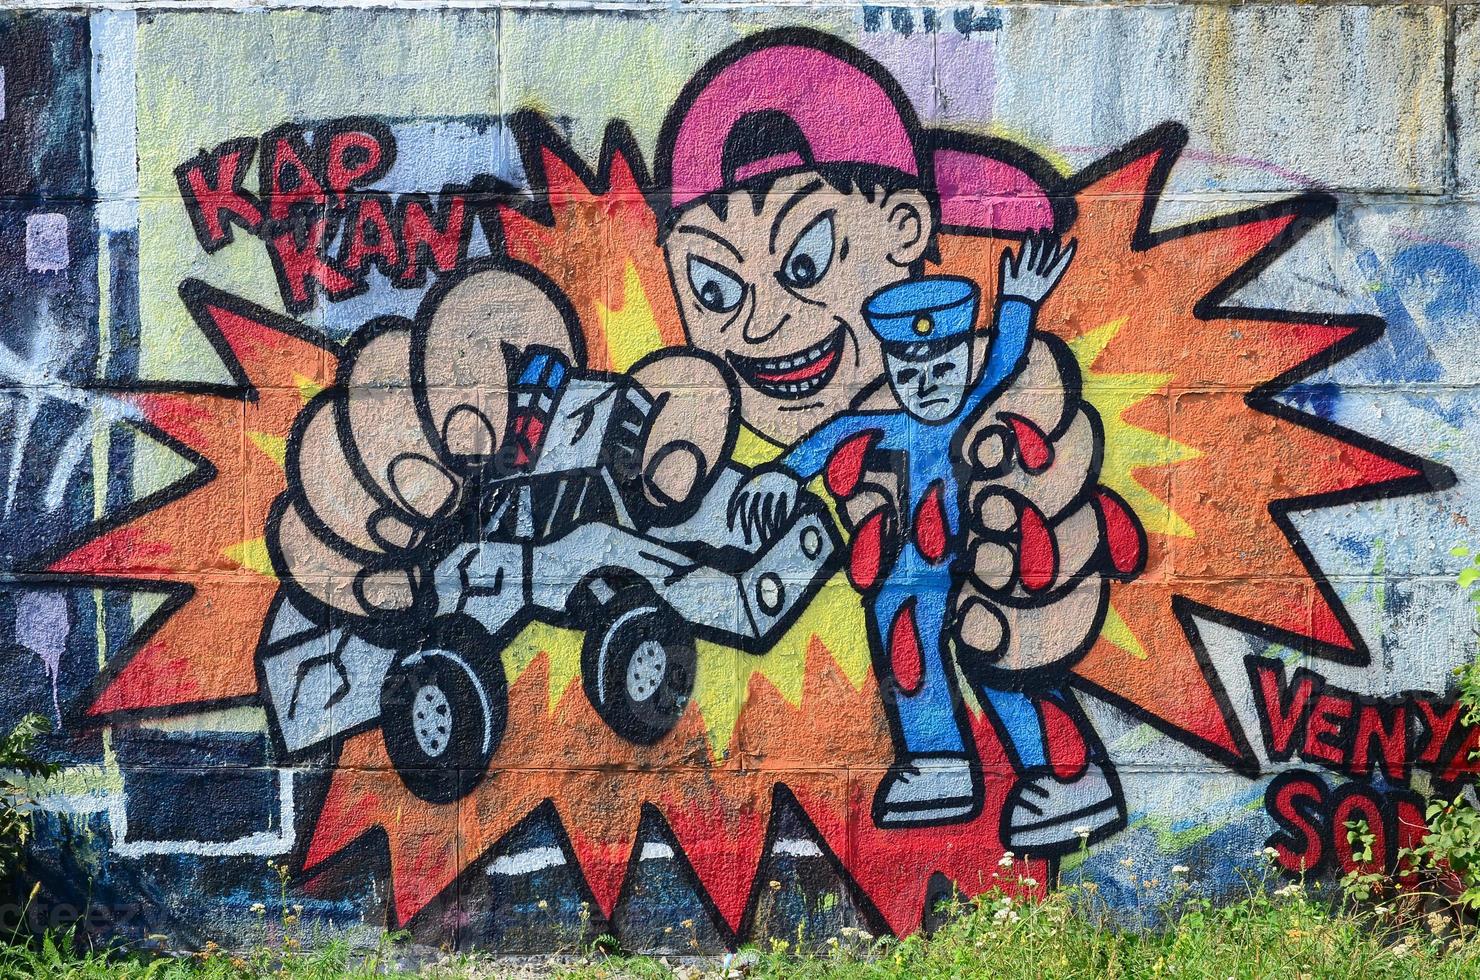 Fragment of graffiti drawings. The old wall decorated with paint stains in the style of street art culture. Child breaks police toys photo